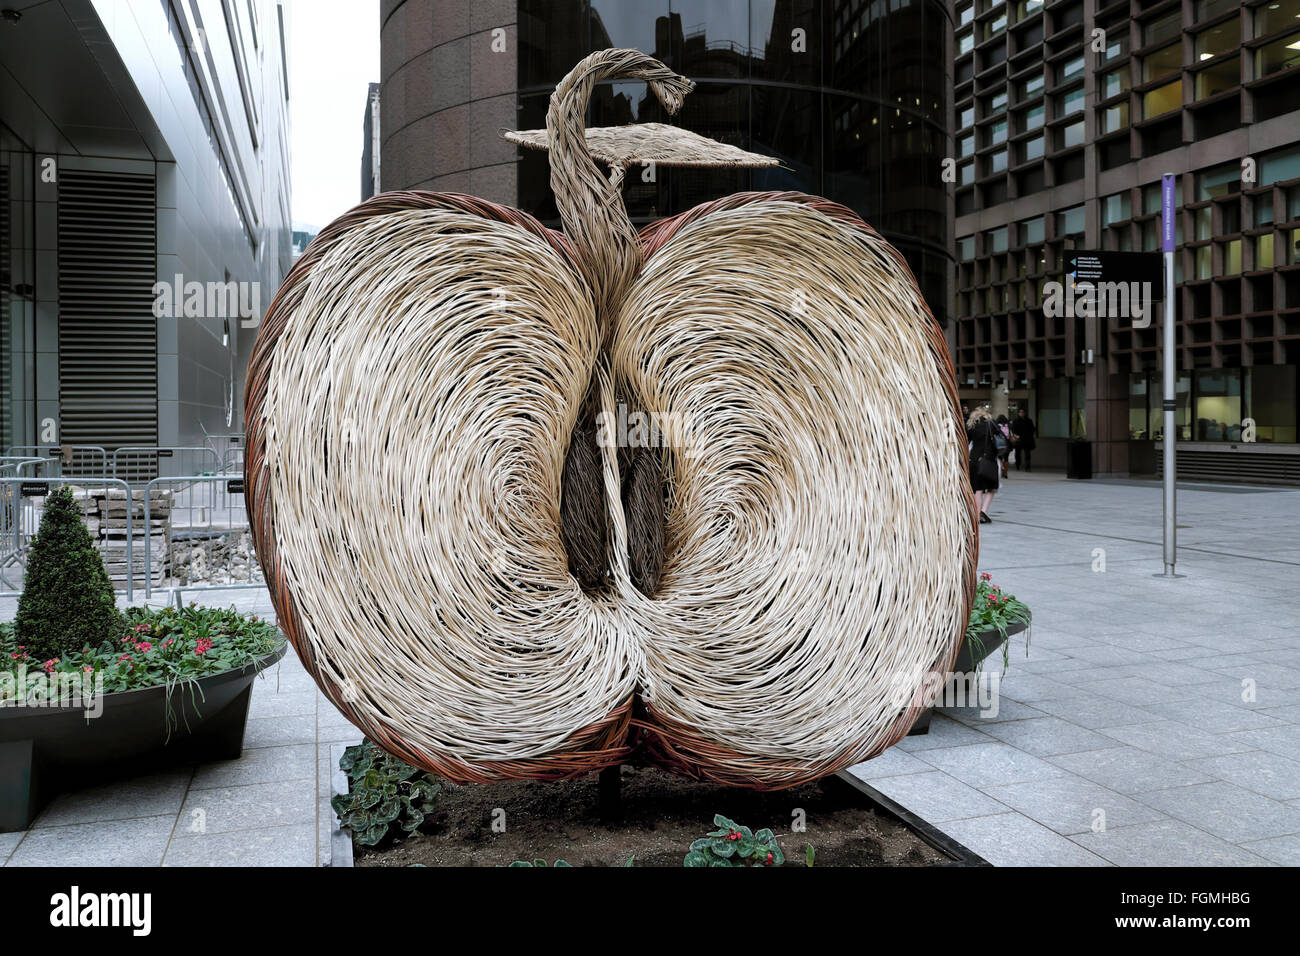 Apple woven willow sculpture by artist Tom Hare at the Broadgate Centre in the Square Mile City of London England UK   KATHY DEWITT Stock Photo